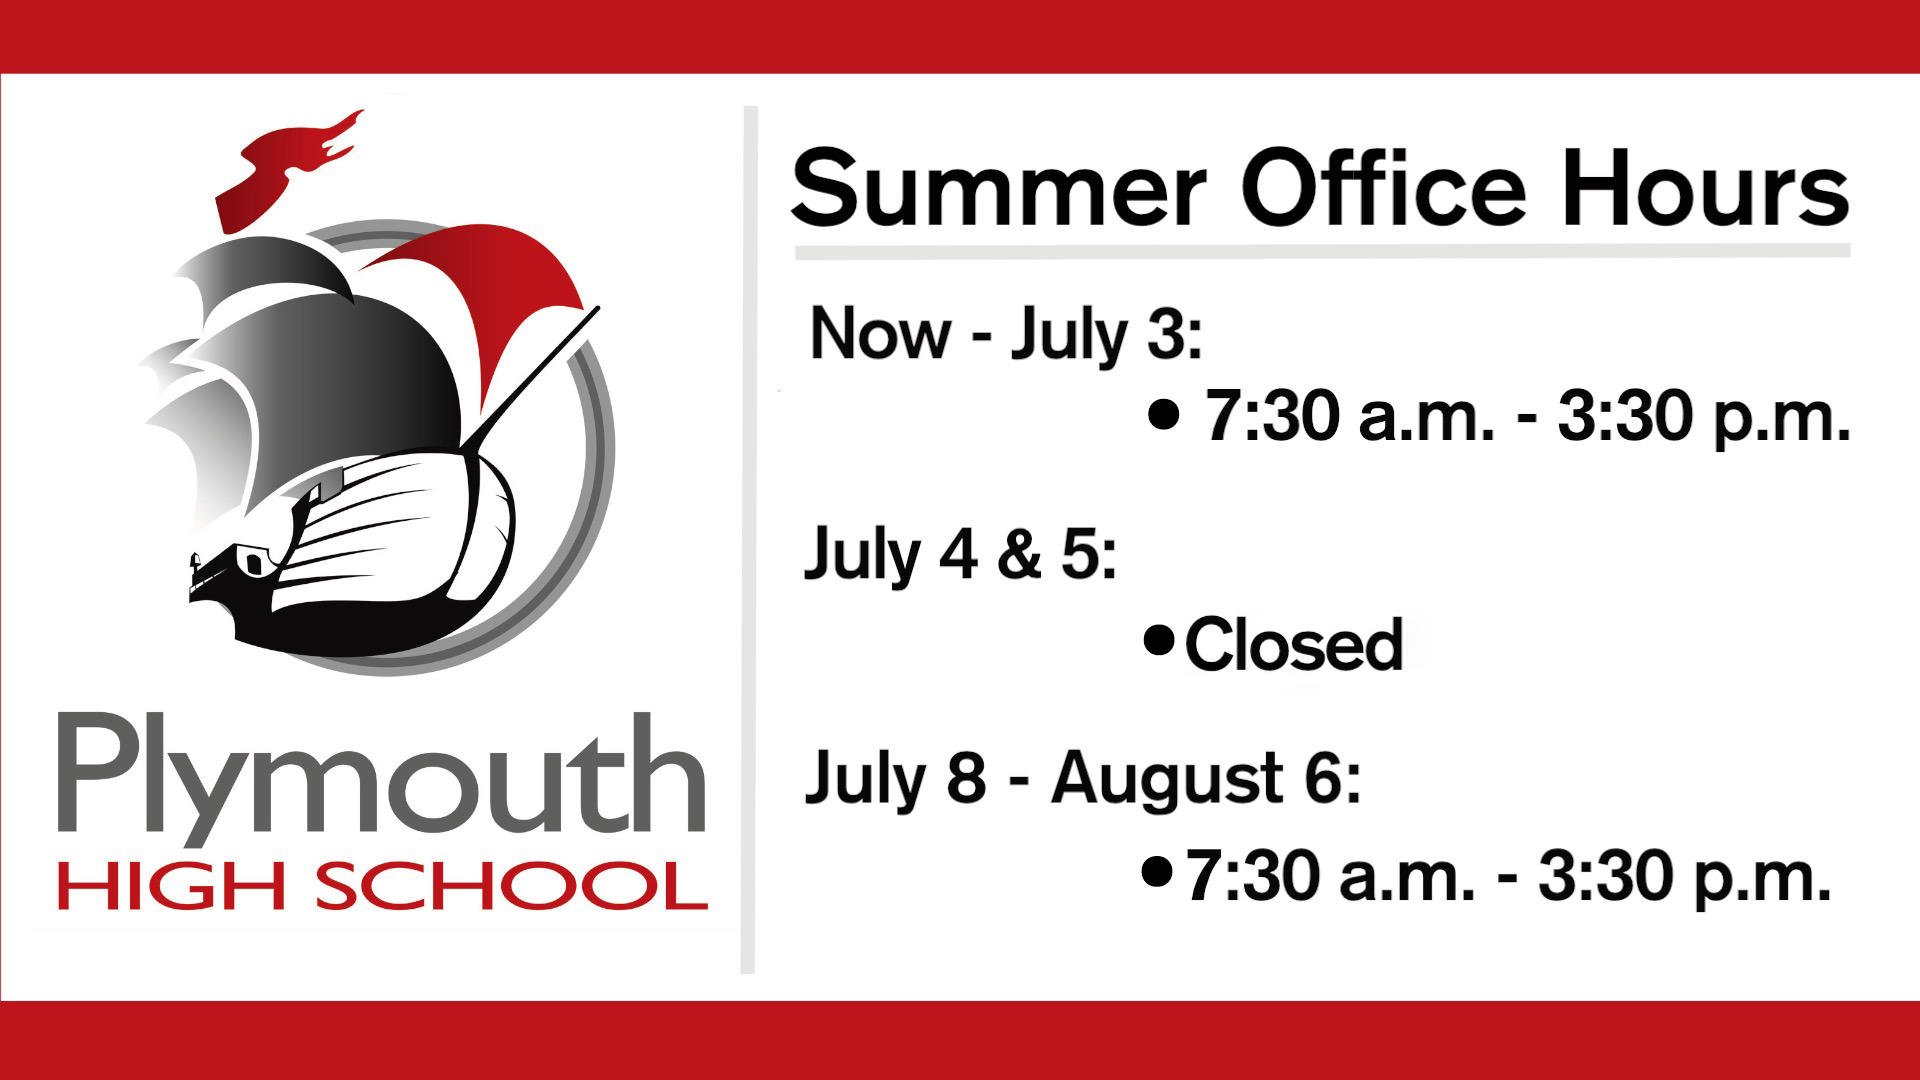 PHS Ship Logo - SUMMER OFFICE HOURS:  June 5th - July 3rd 7:30 am - 3:30 pm  July 4th & 5th Office Closed  July 8th - Aug. 6th 7:30am - 3:30pm